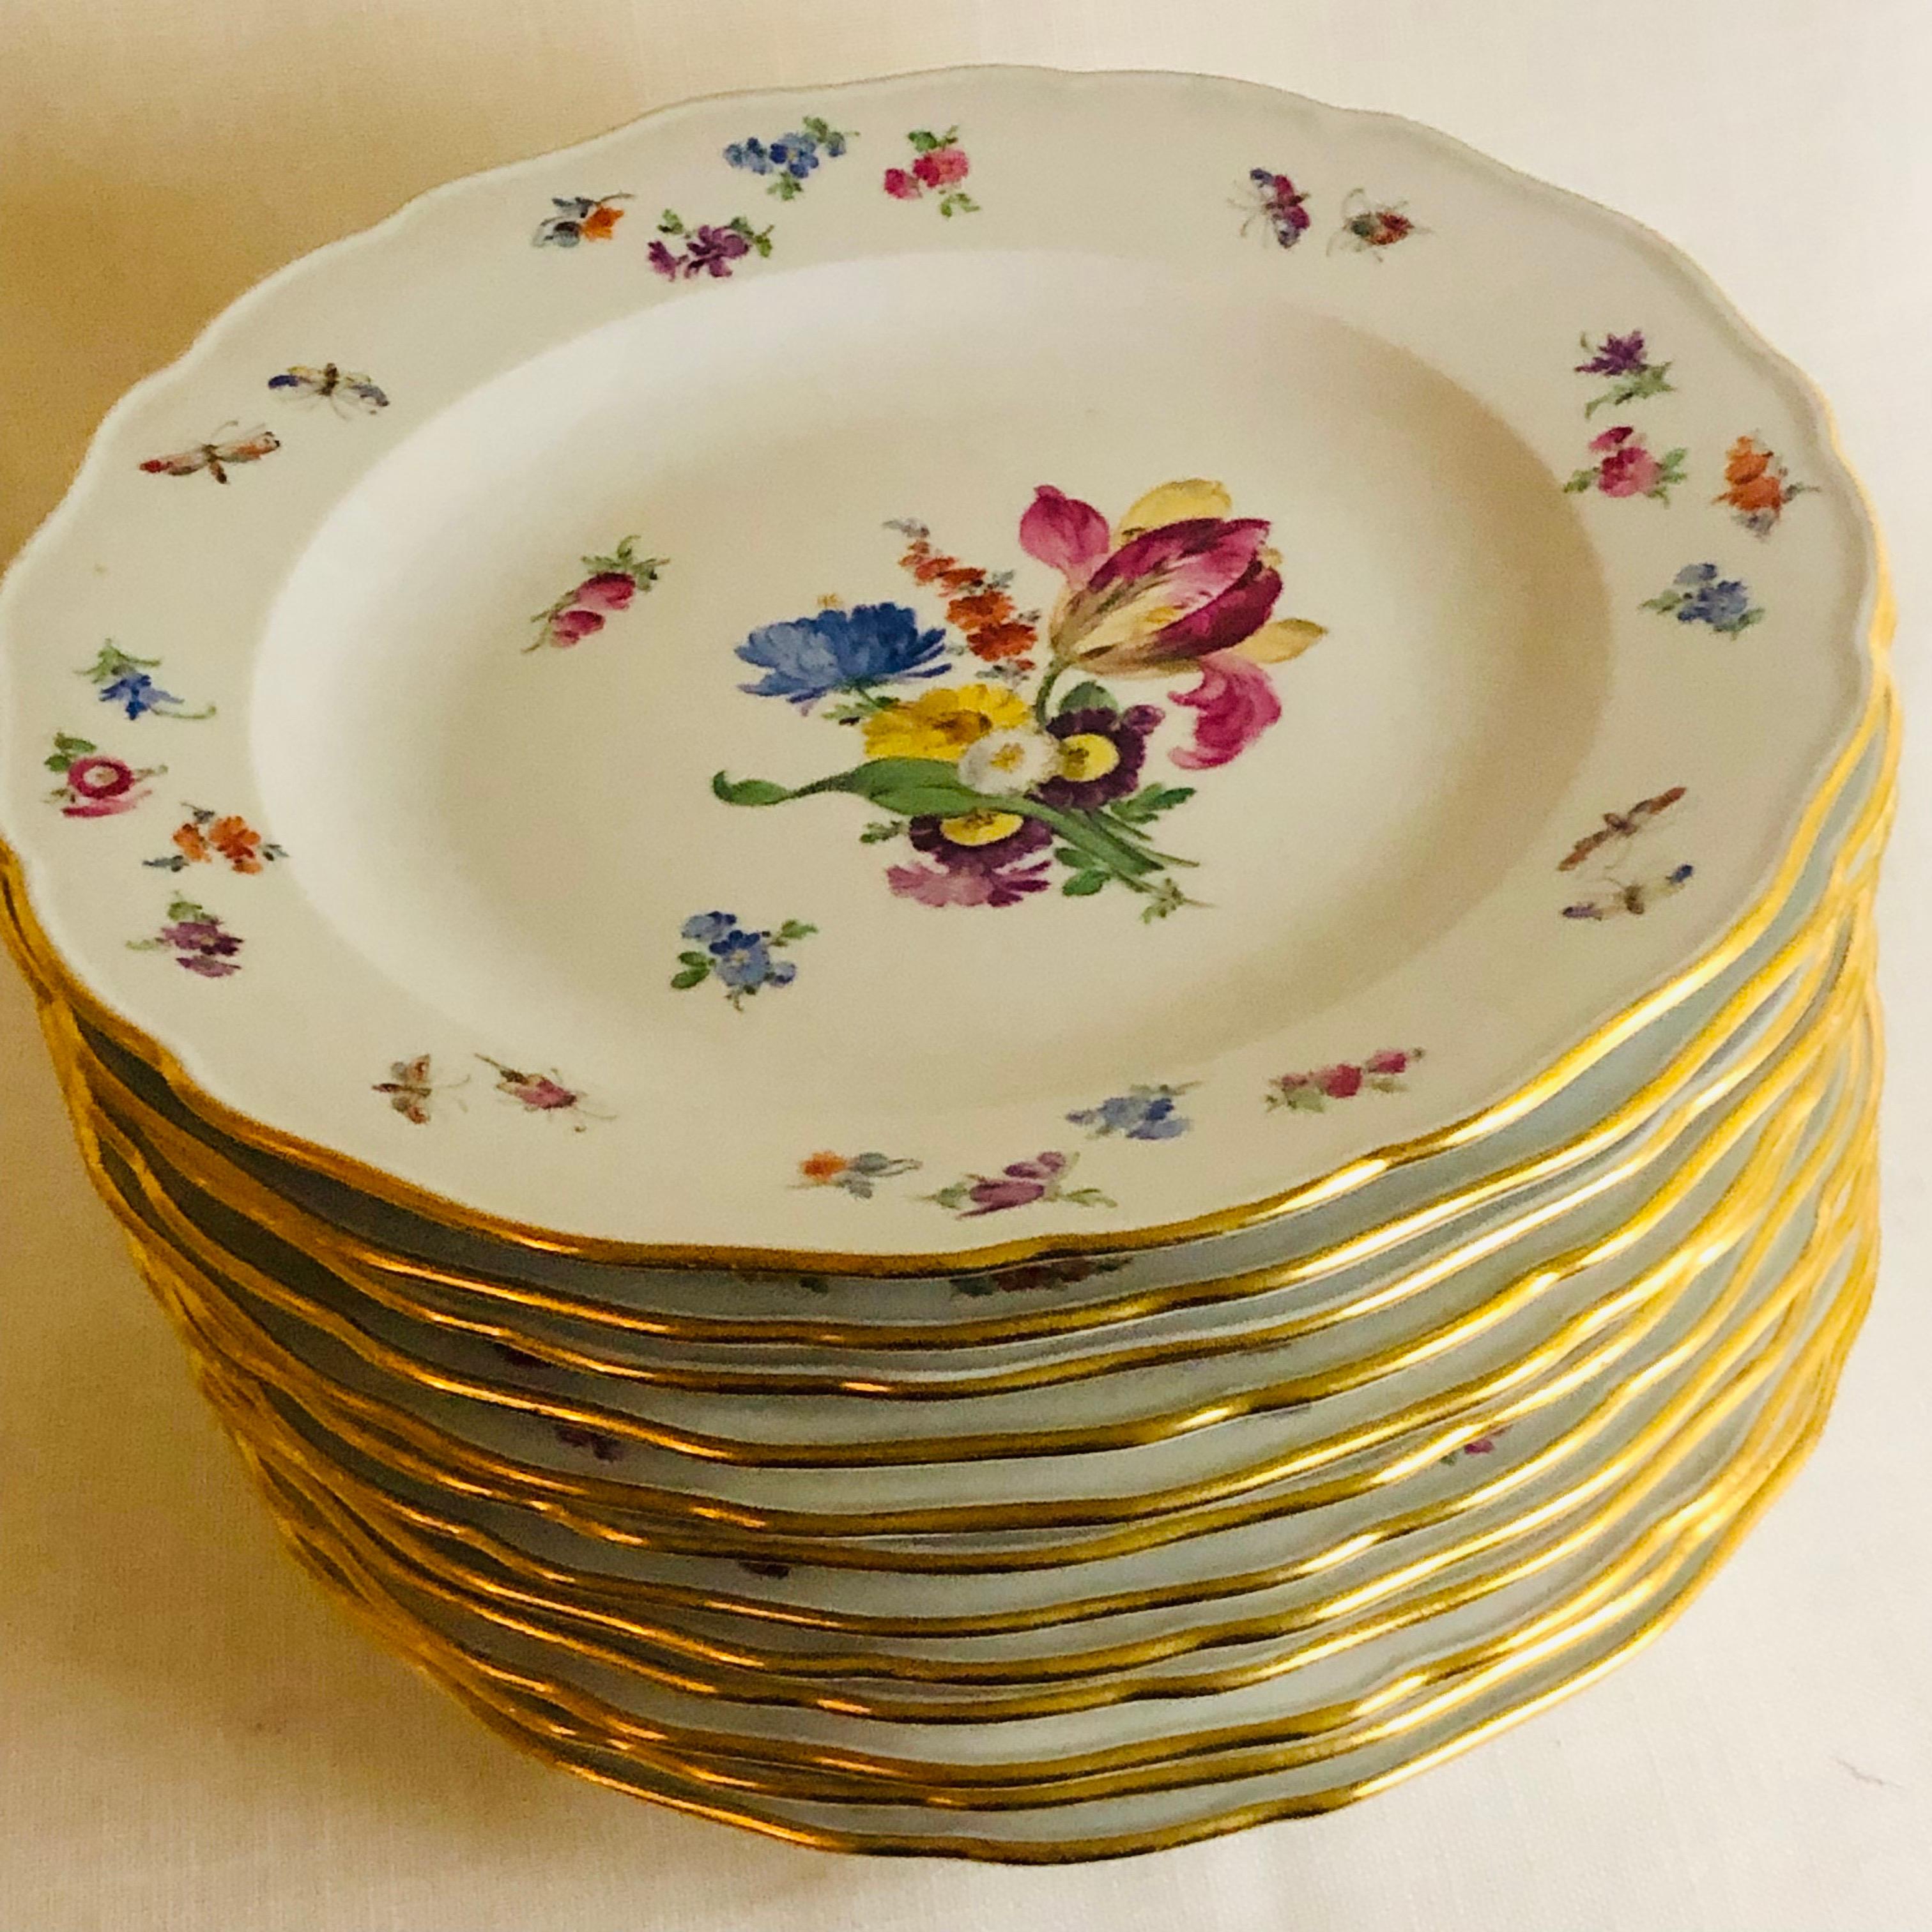 Set of 12 Meissen Dinner Plates Each Painted with a Different Bouquet of Flowers 7